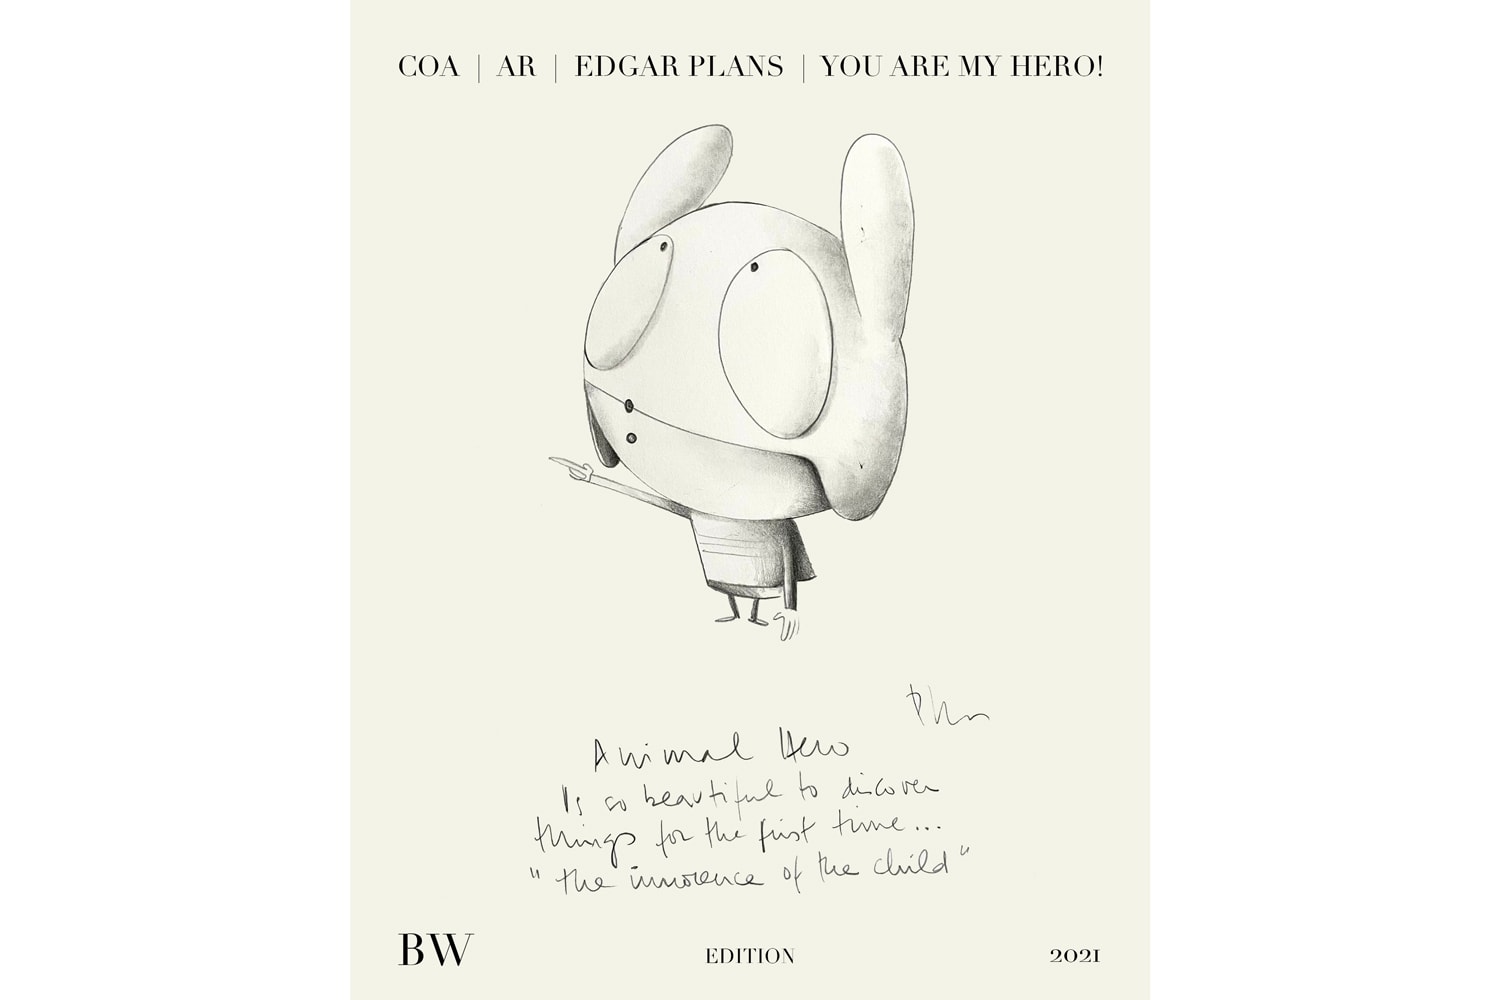 edgar plans you are my hero augmented reality artwork print edition